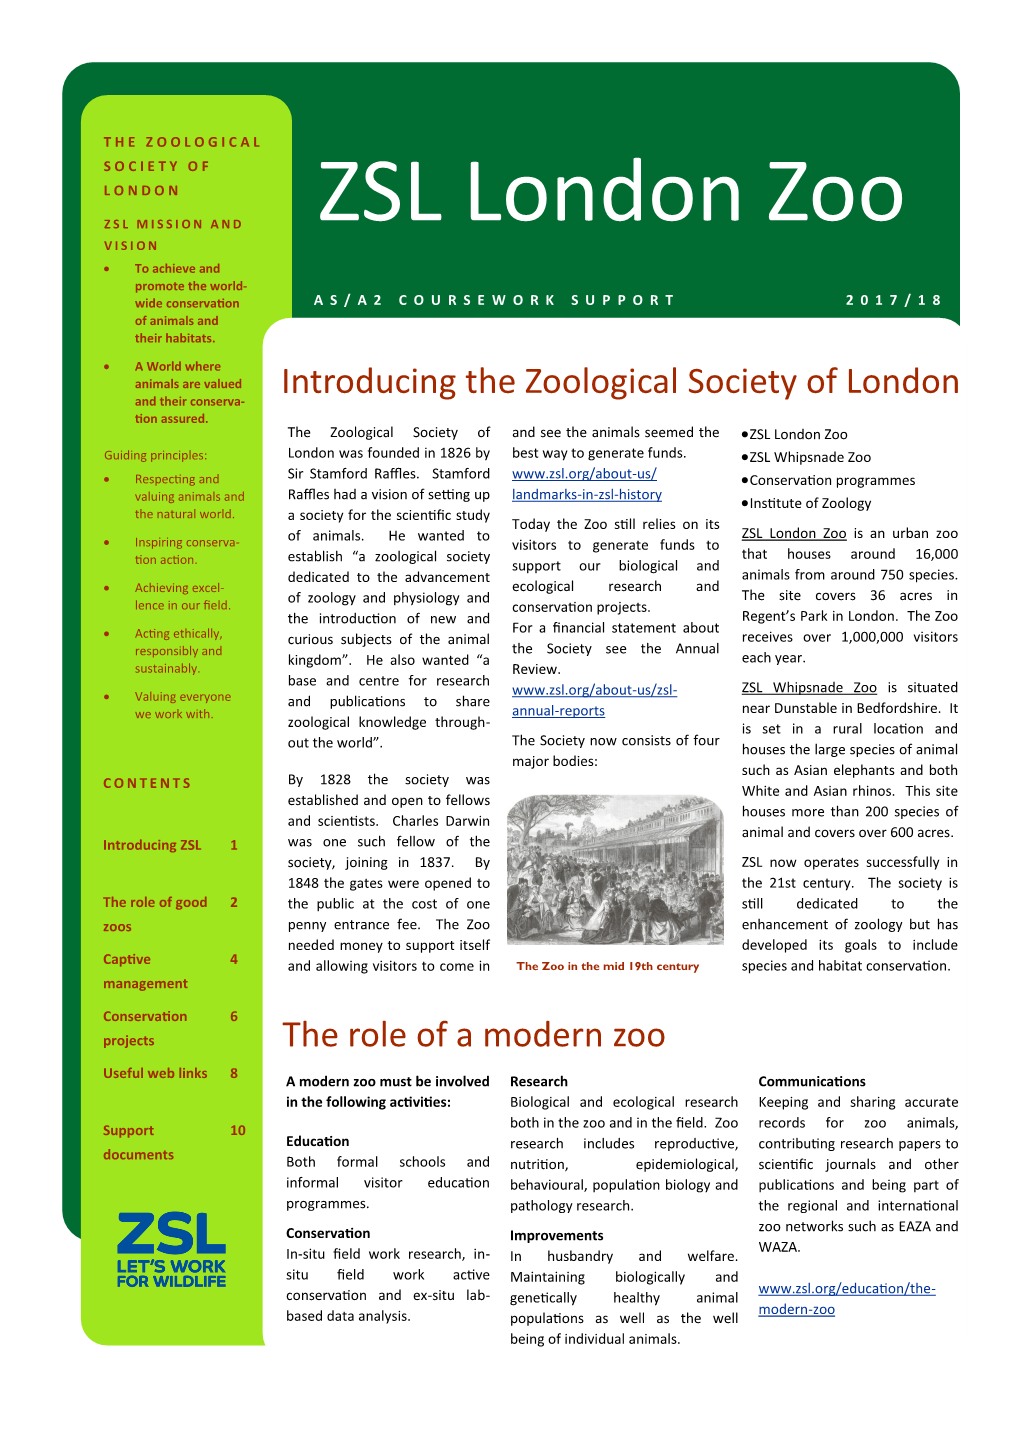 ZSL London Zoo VISION  to Achieve and Promote the World- Wide Conservation AS/A2 COURSEWORK SUP P O R T 2 0 1 7 / 1 8 of Animals and Their Habitats